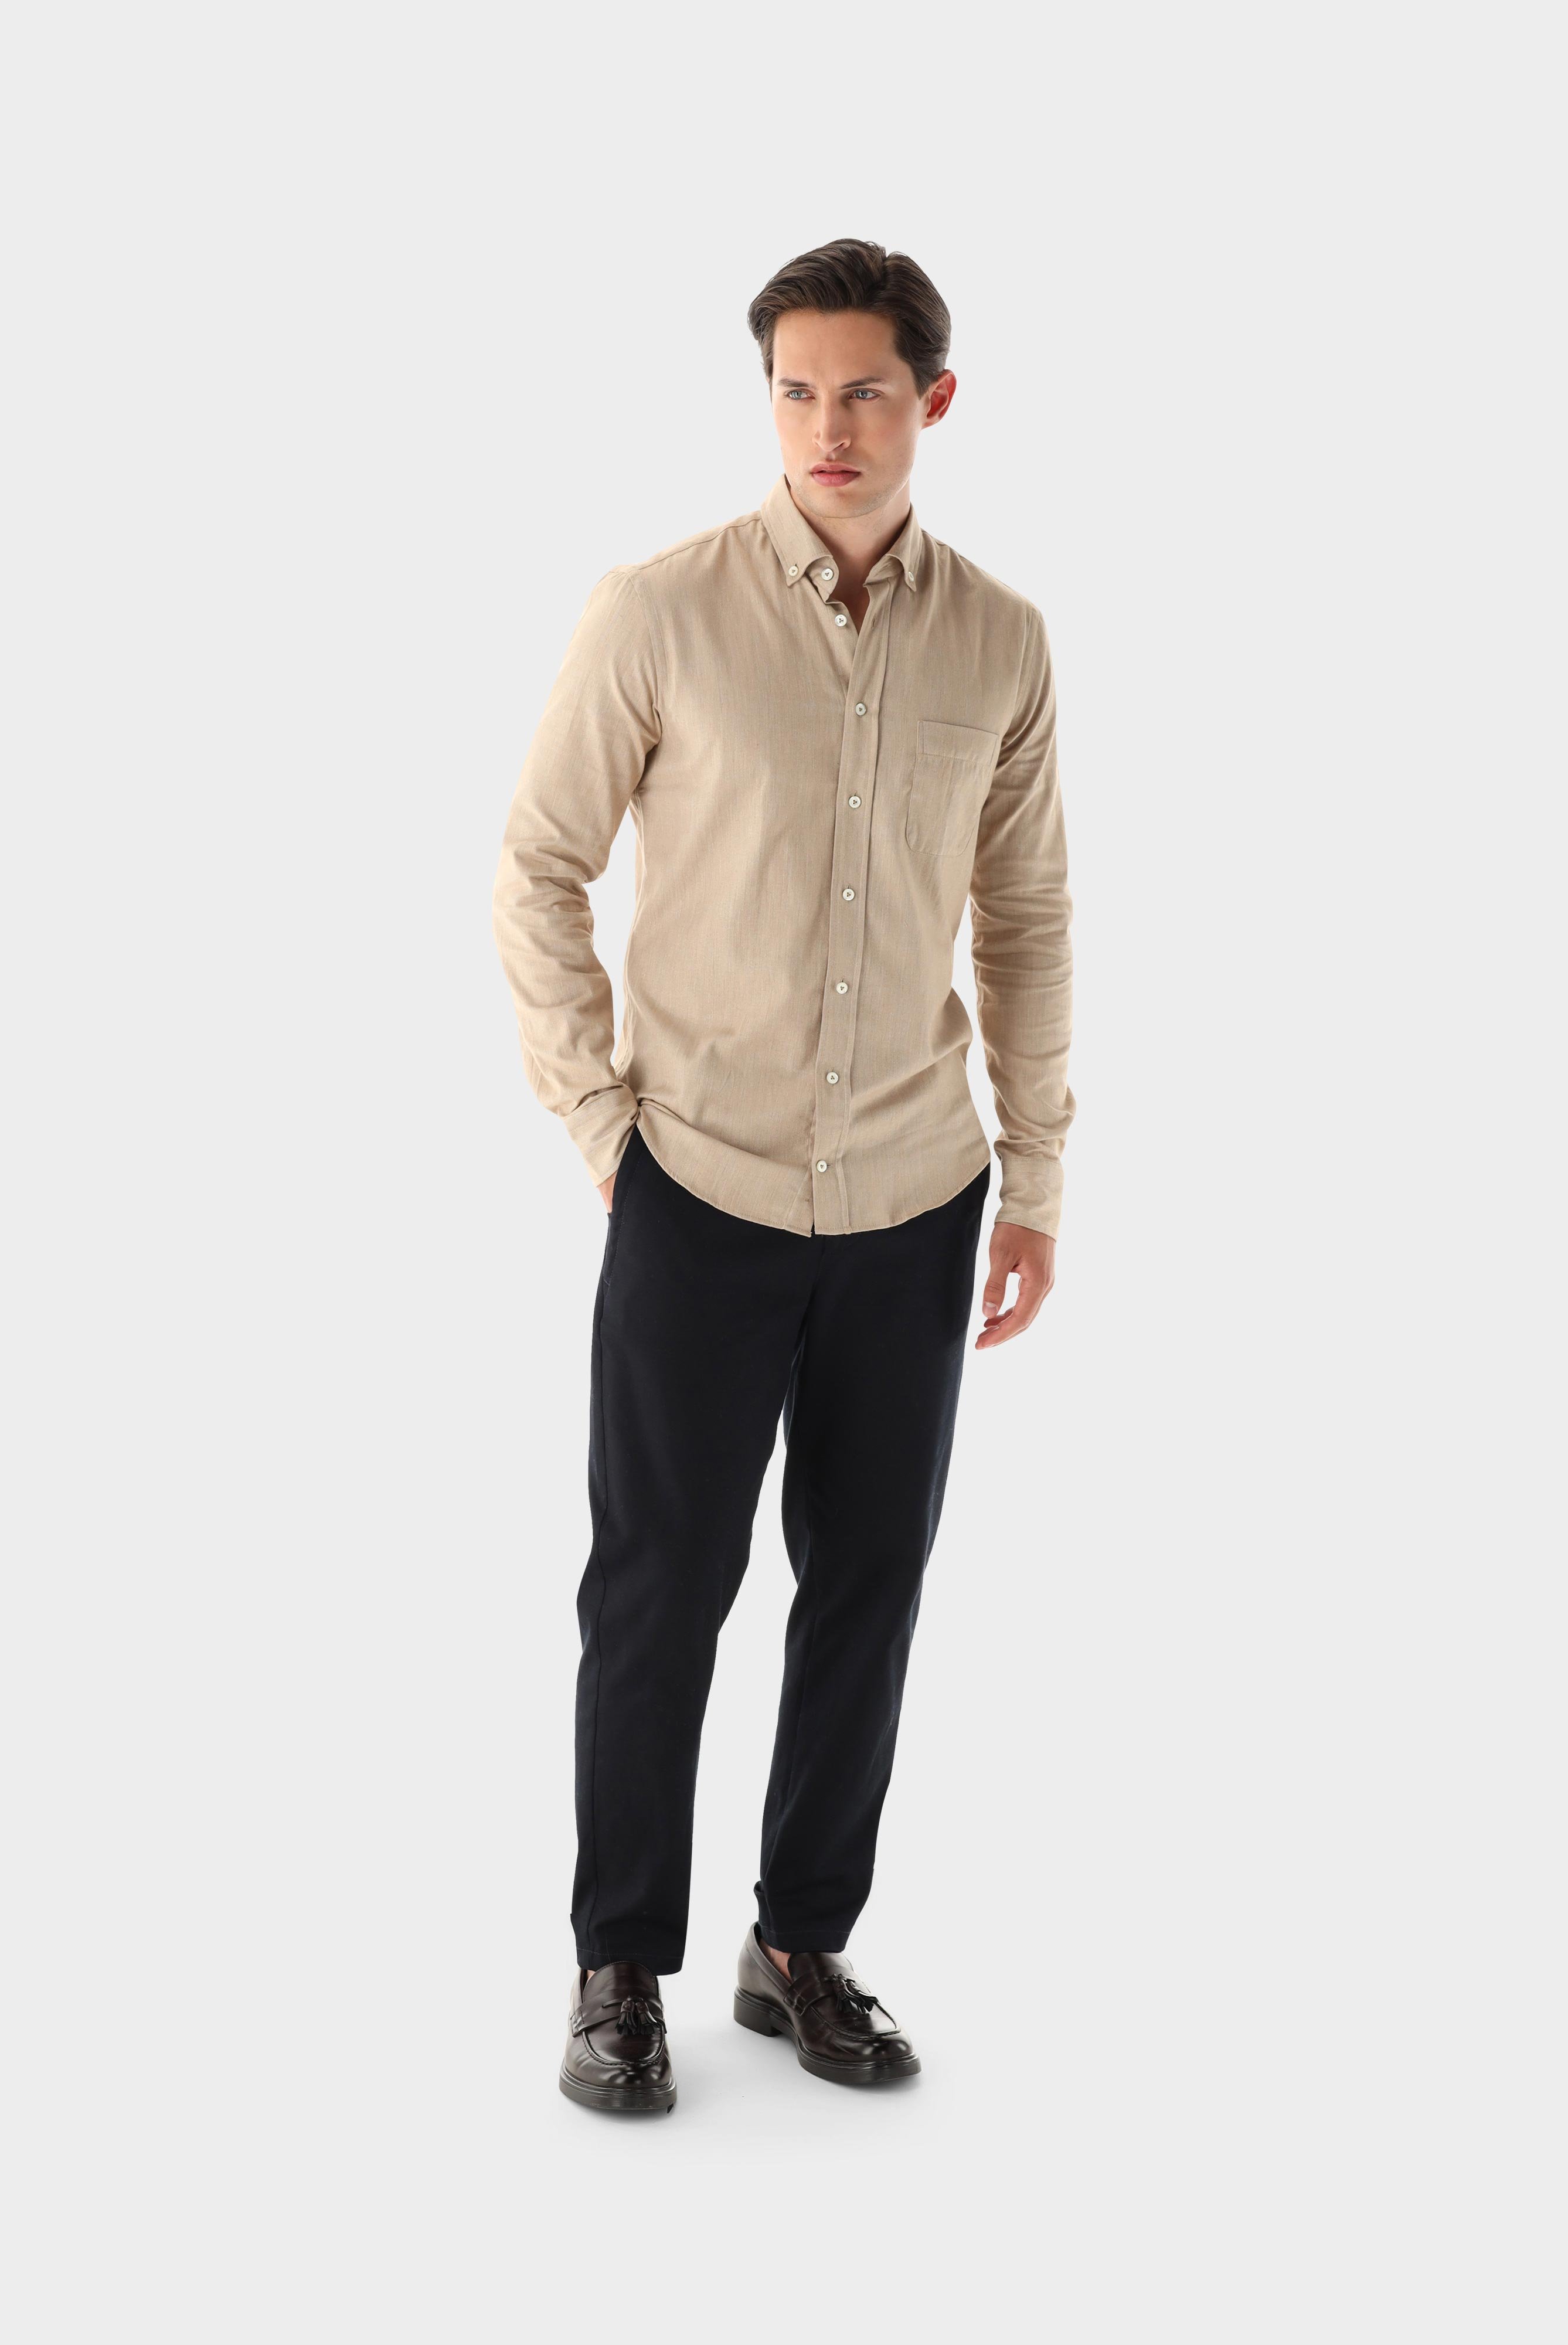 Casual Hemden+Button-Down Flanellhemd Tailor Fit+20.2013.9V.155045.130.38